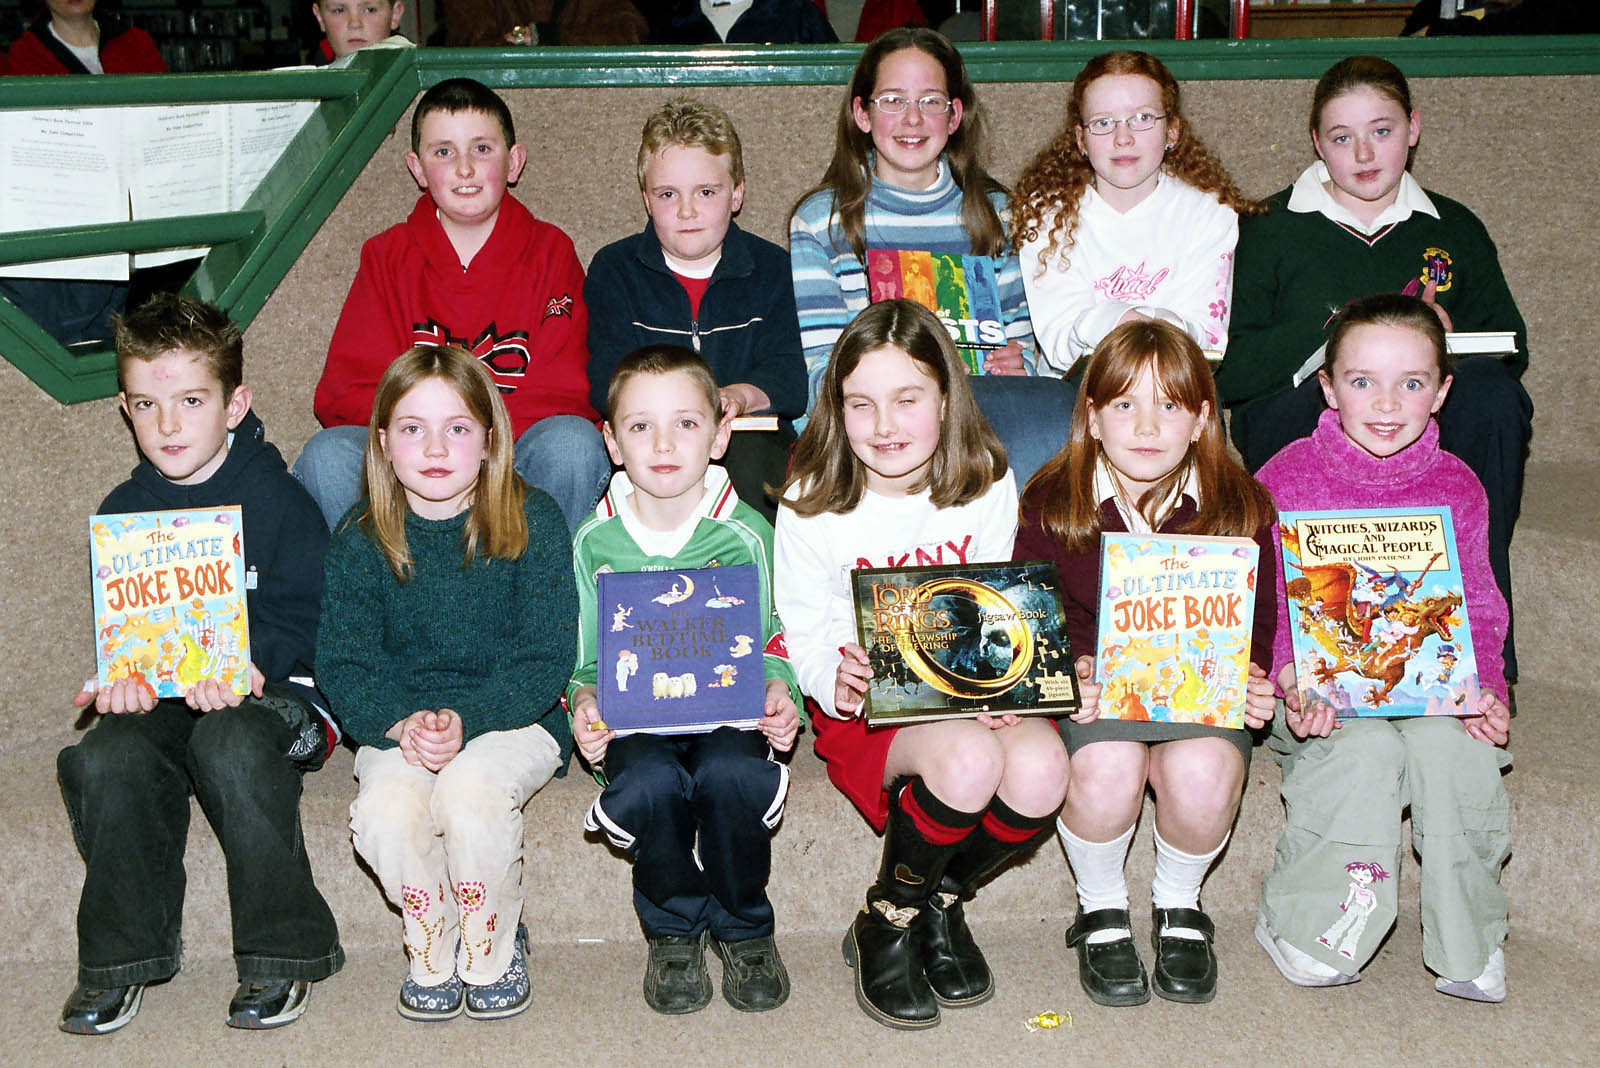 Pictured at Castlebar Library a group of the Poetry competition winners from Book Week: Rory Gaffney (age 4), Sinead Gaffney (age 6), Alan Foy (age 6), Grainne Campbell (age 7), Paula Groethe (age 7), Jordan Higgins (age 8),Niamh Donnelly (age 9), Ailbhe McConnell (age 9),Martin Sykes (age 10), Emily Davidson (age 10), Caoimhe McCann (age 11), Sheona OMalley (age 11), Padraig Cunnane (age 12), Lisa Filan (age 12), Tracey Costello (age 13), Ammi Burke (age 13), Maria McDaid (age 14). Photo  Ken Wright Photography 2004.

